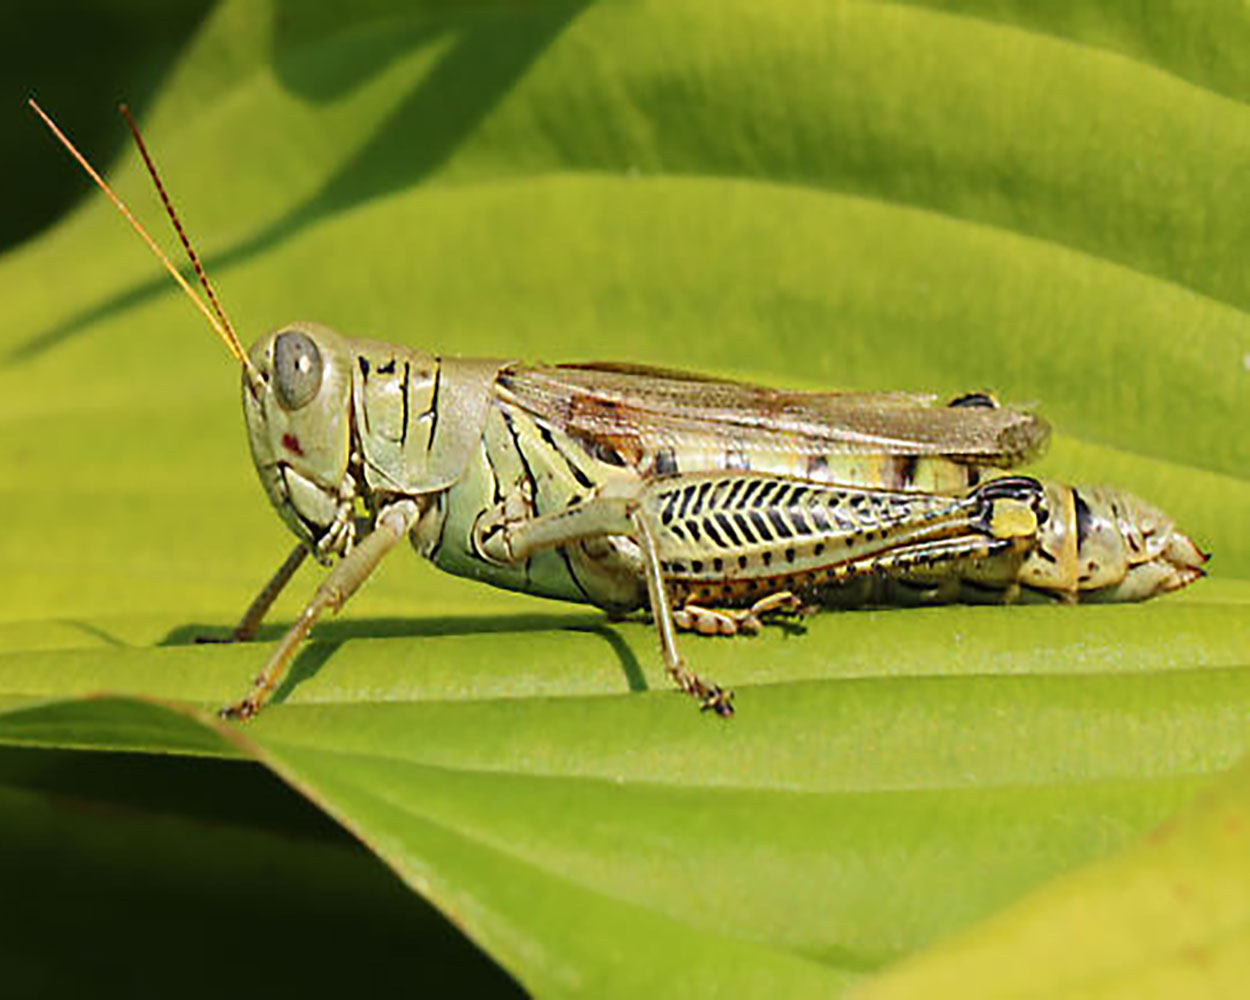 A light green grasshopper with black chevron markings on its hind legs.